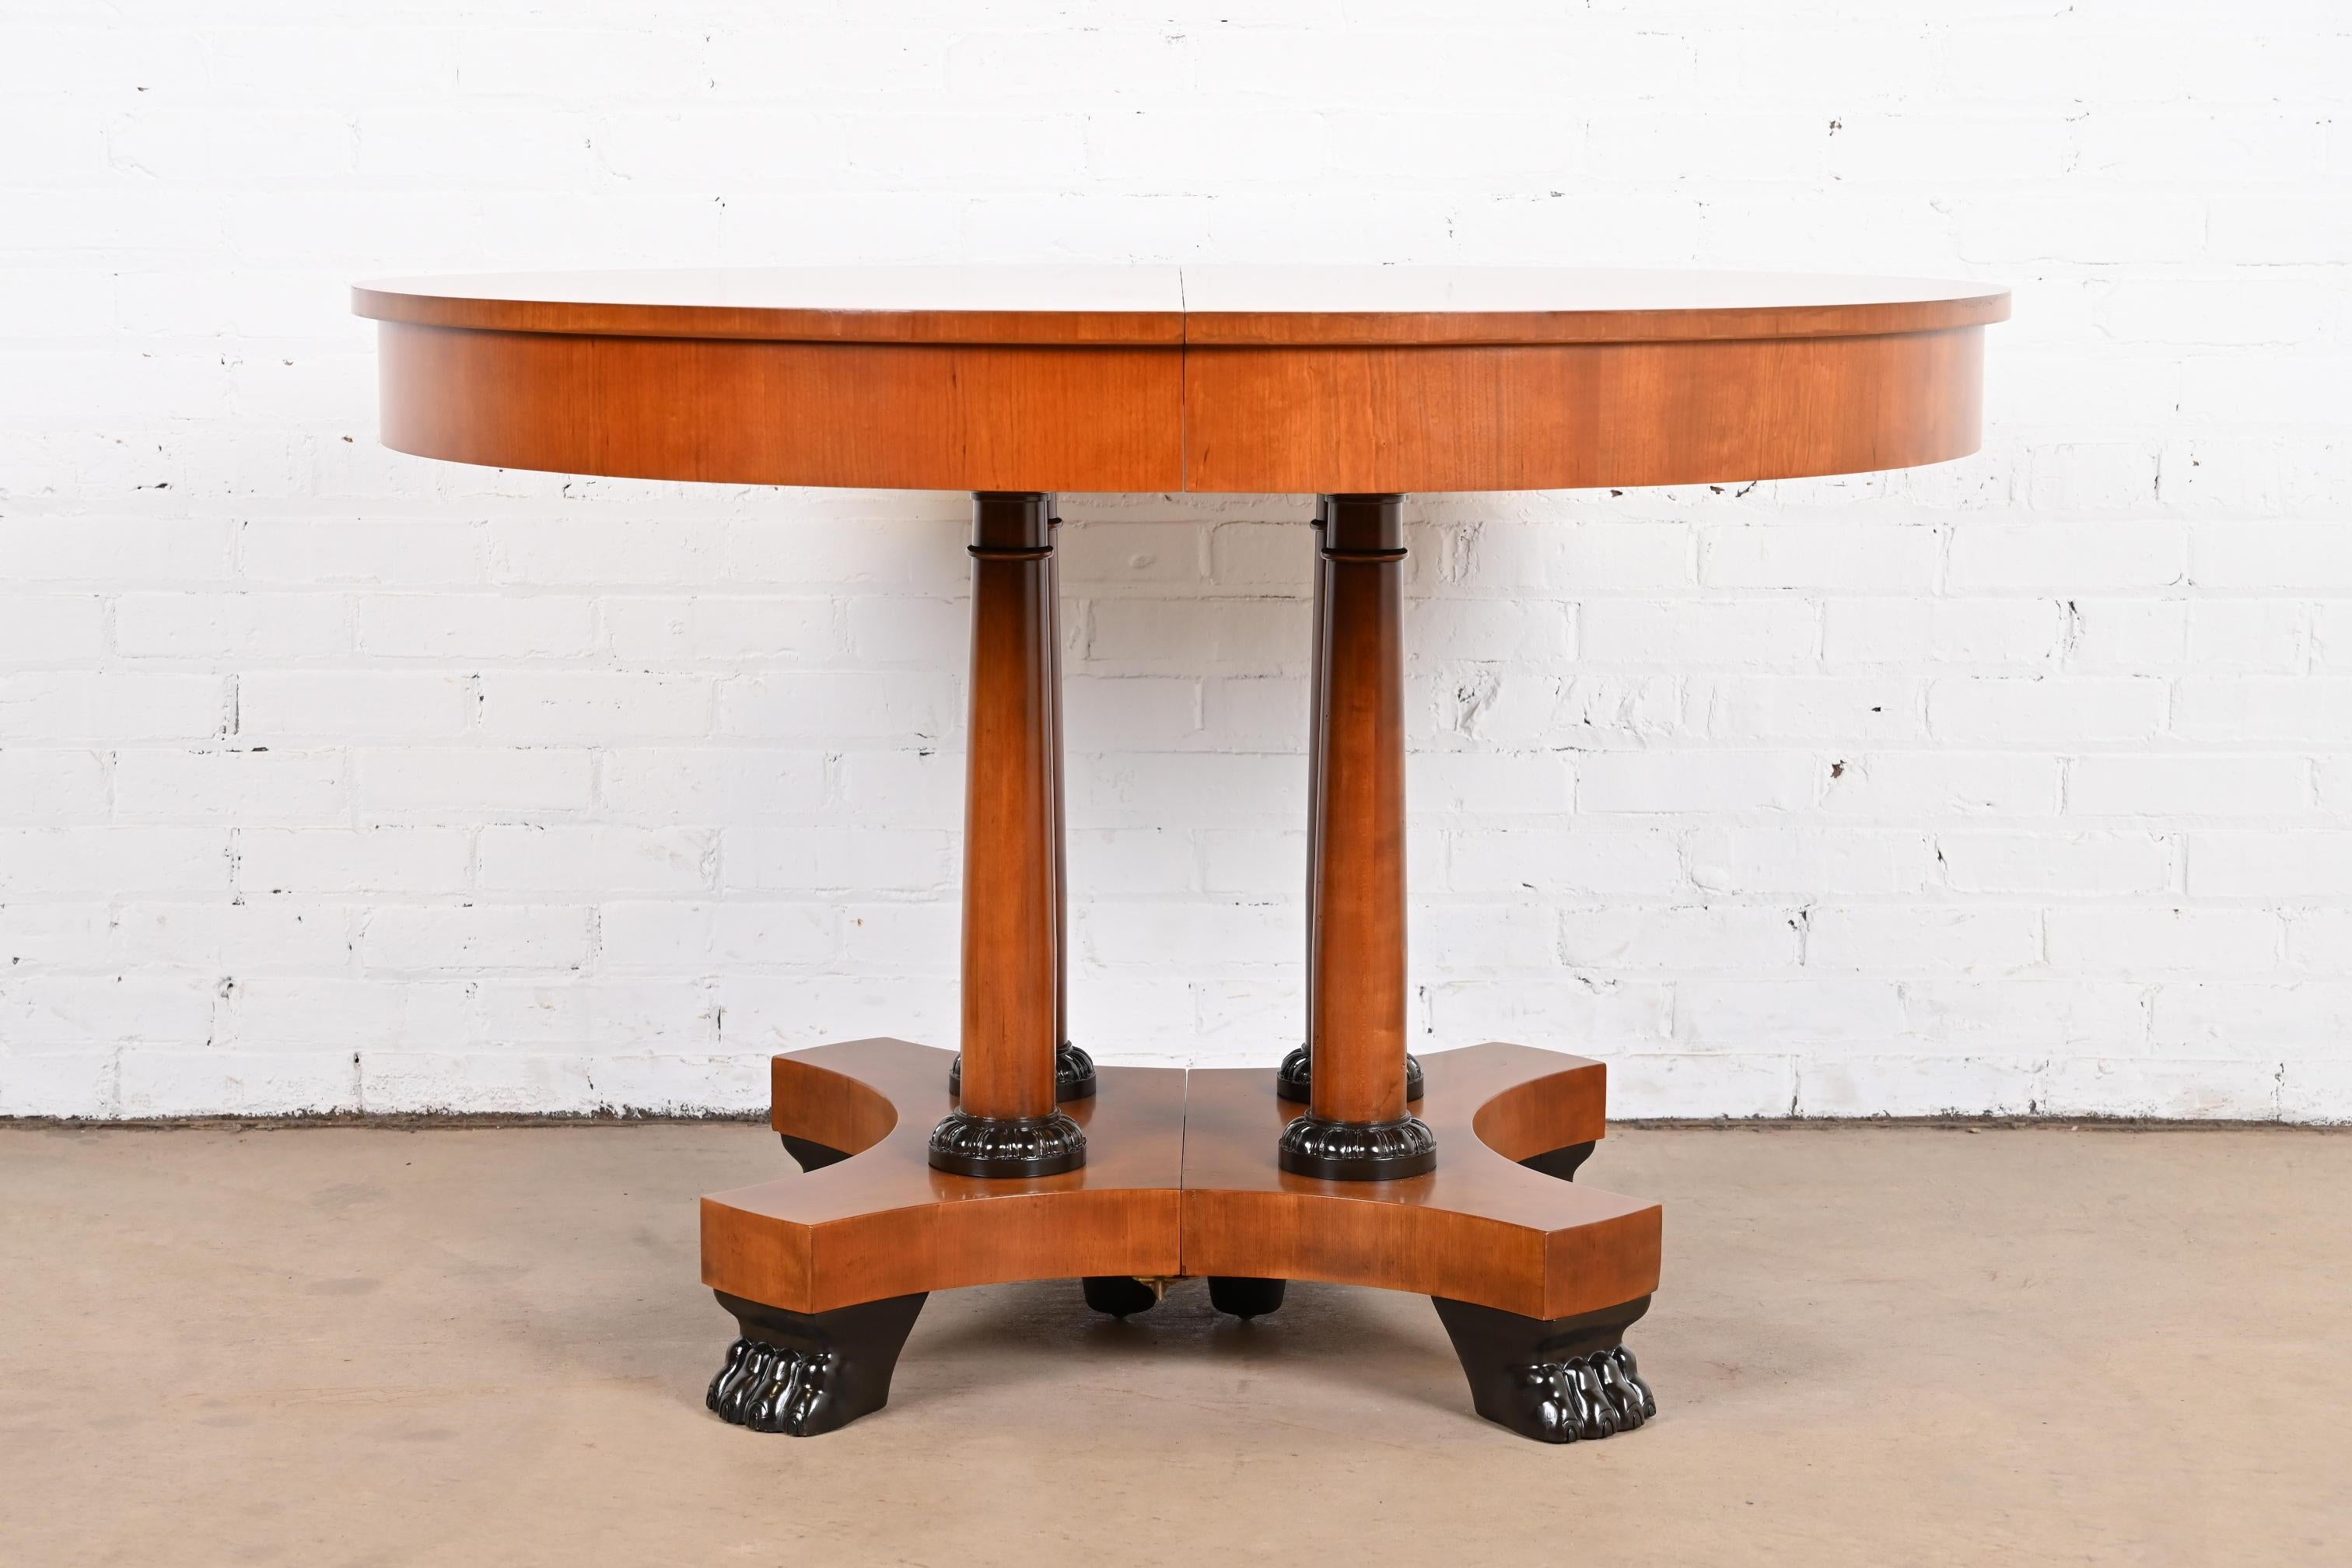 An exceptional neoclassical or Empire style extension pedestal dining table

By Baker Furniture, 